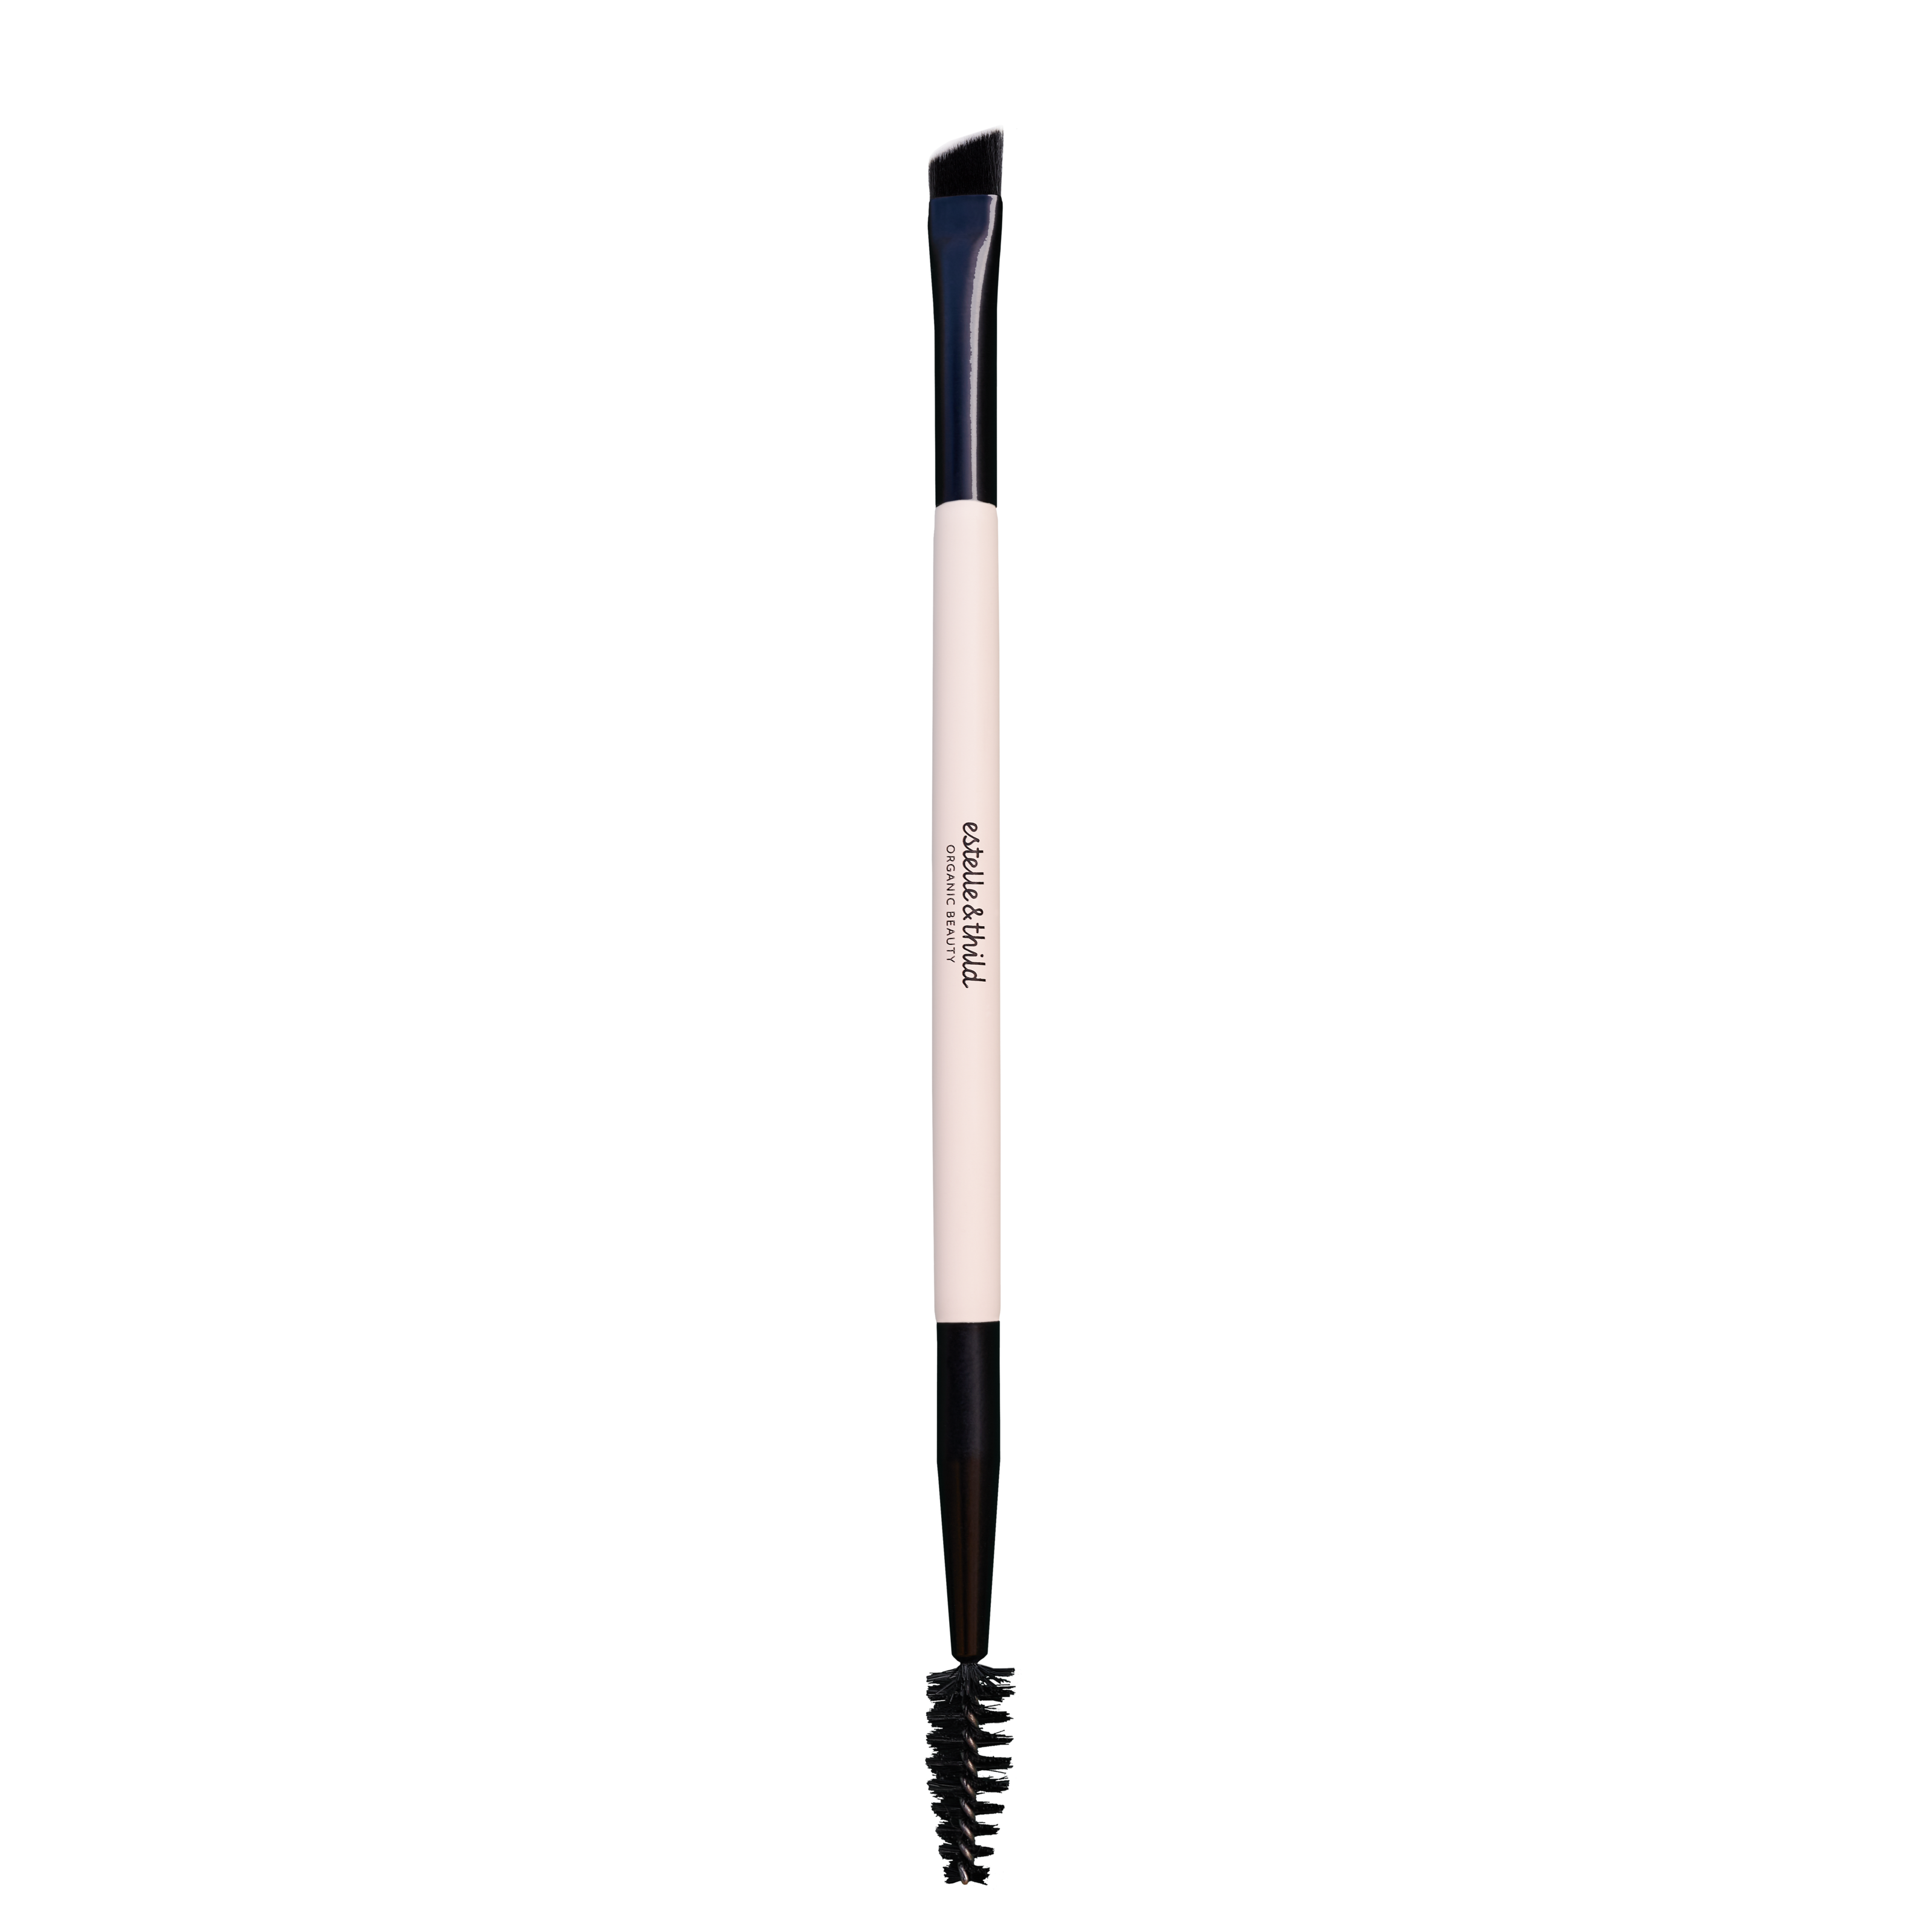 Estelle & Thild BioMineral Double Ended Eyebrow Brush